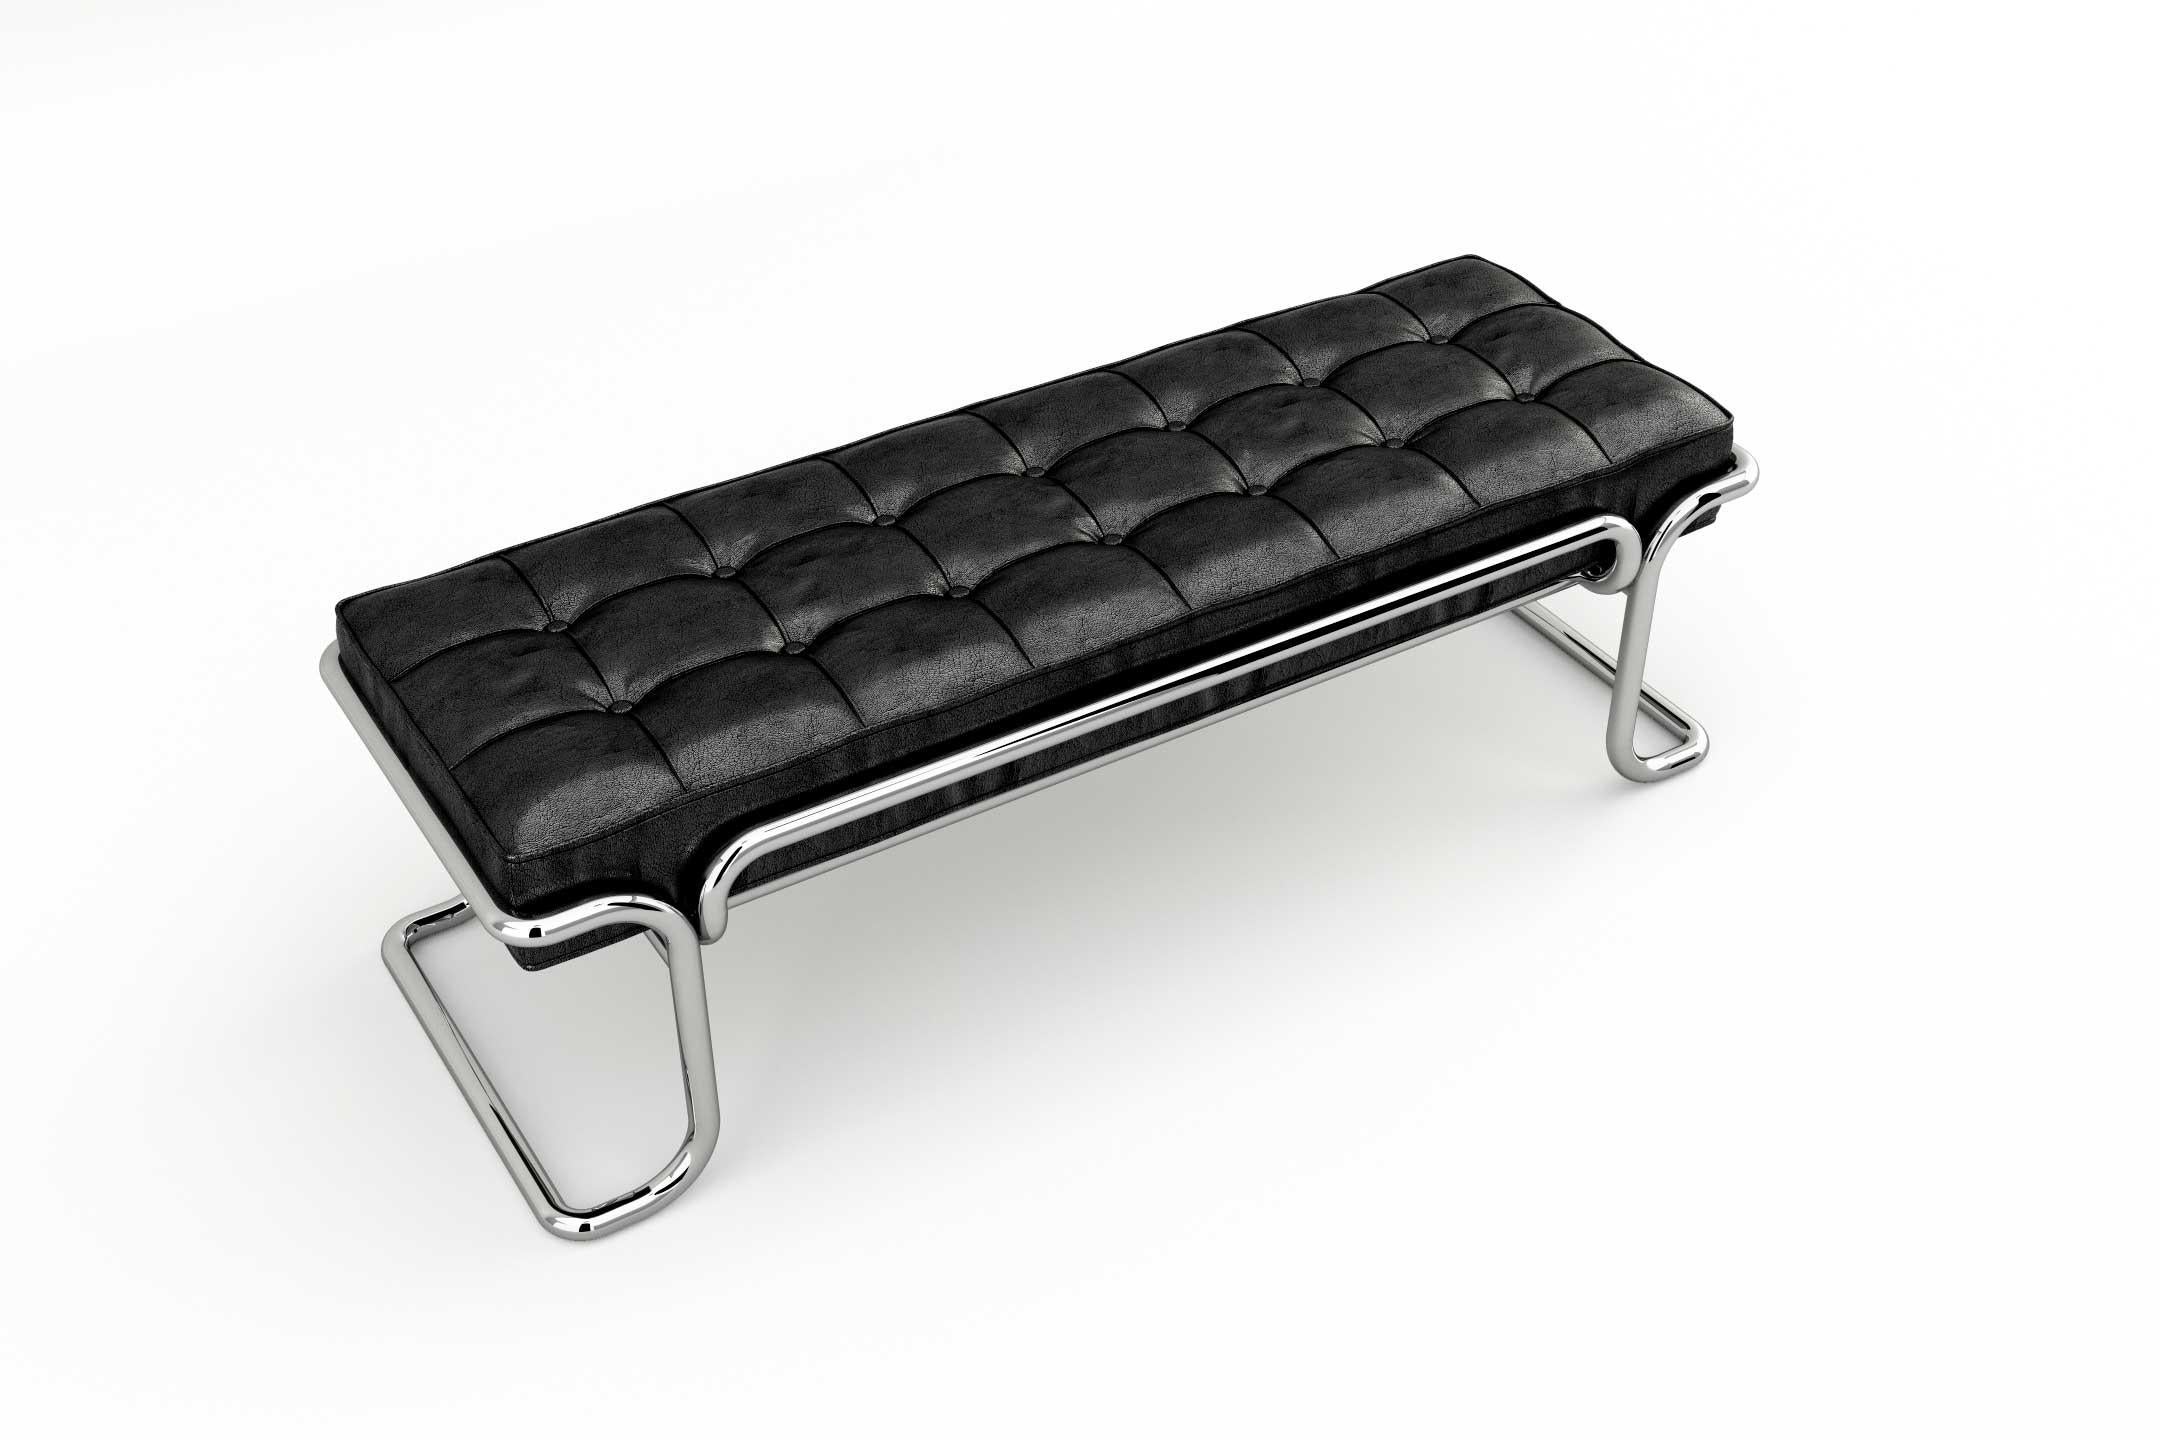 European Lotus Banquette - Modern Black Leather Sofa with Stainless Steel Legs For Sale